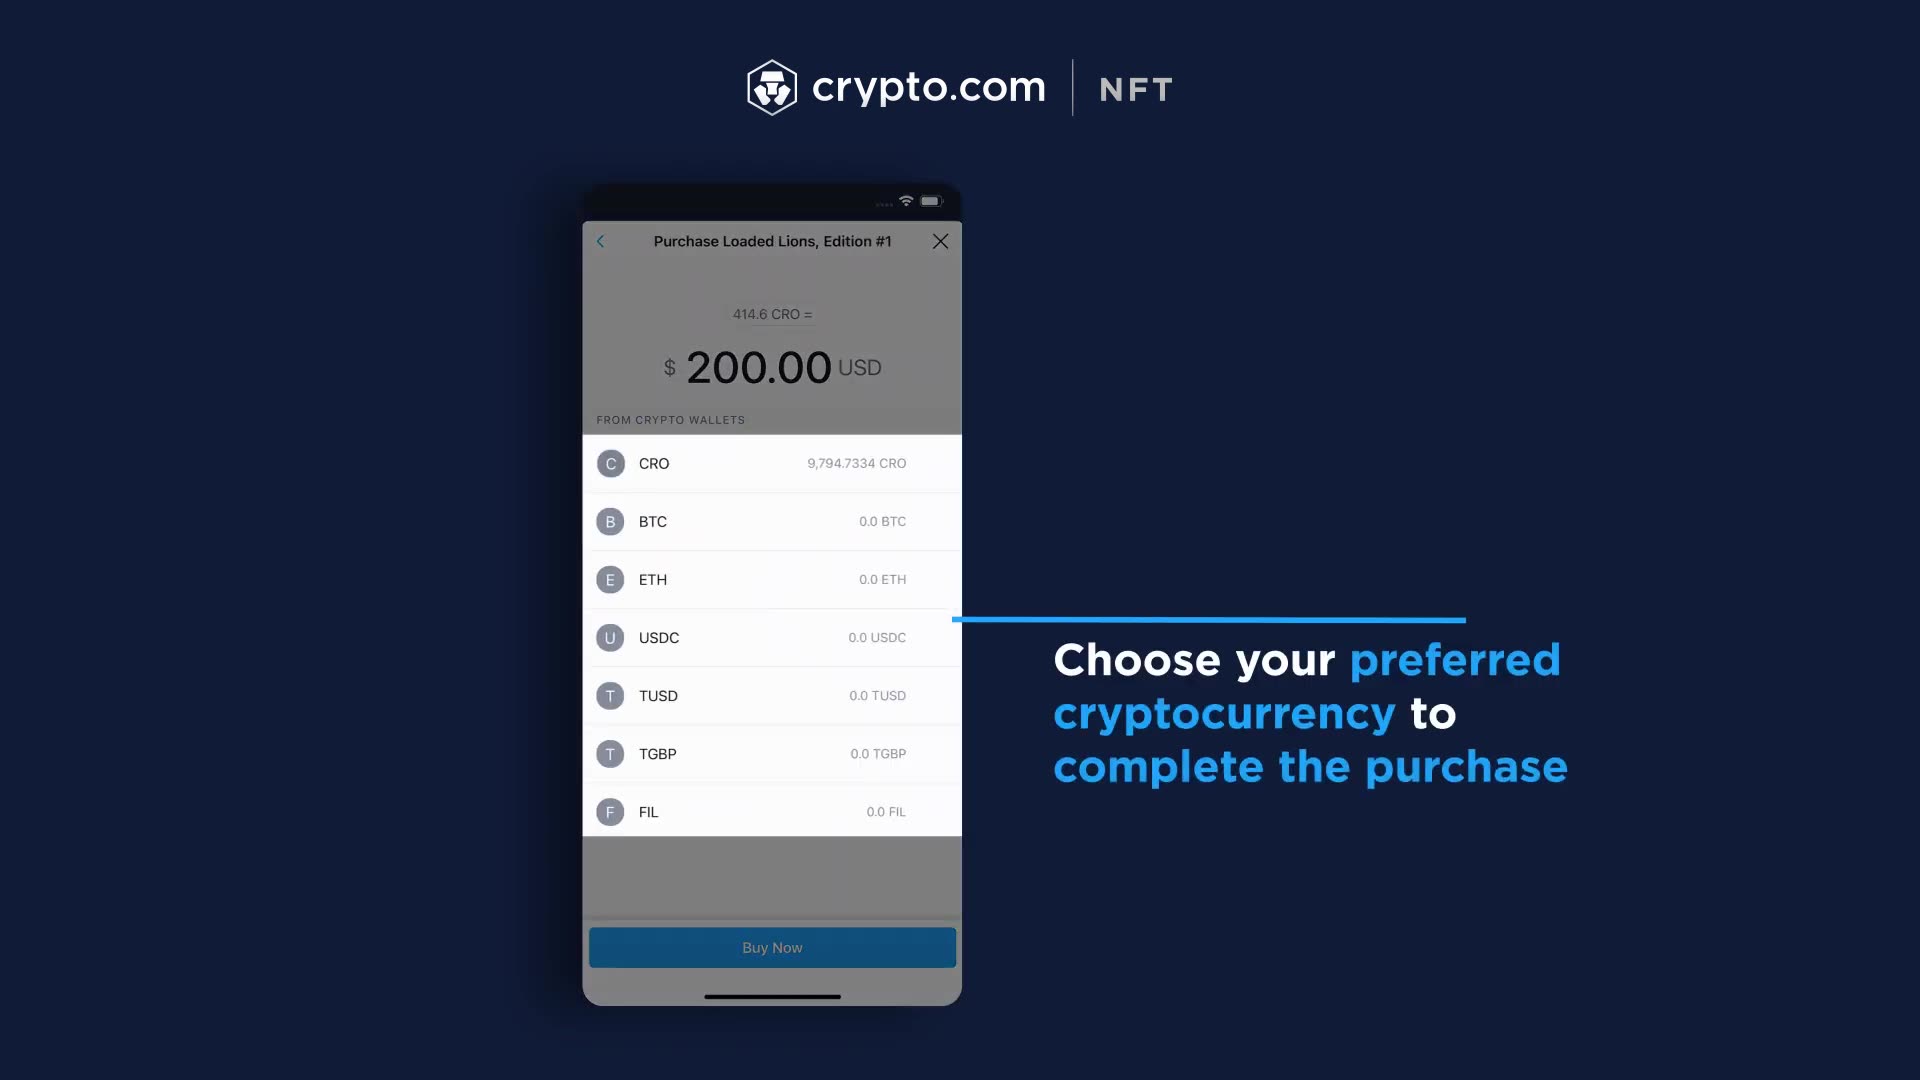 How to purchase NFTs in the Crypto.com App